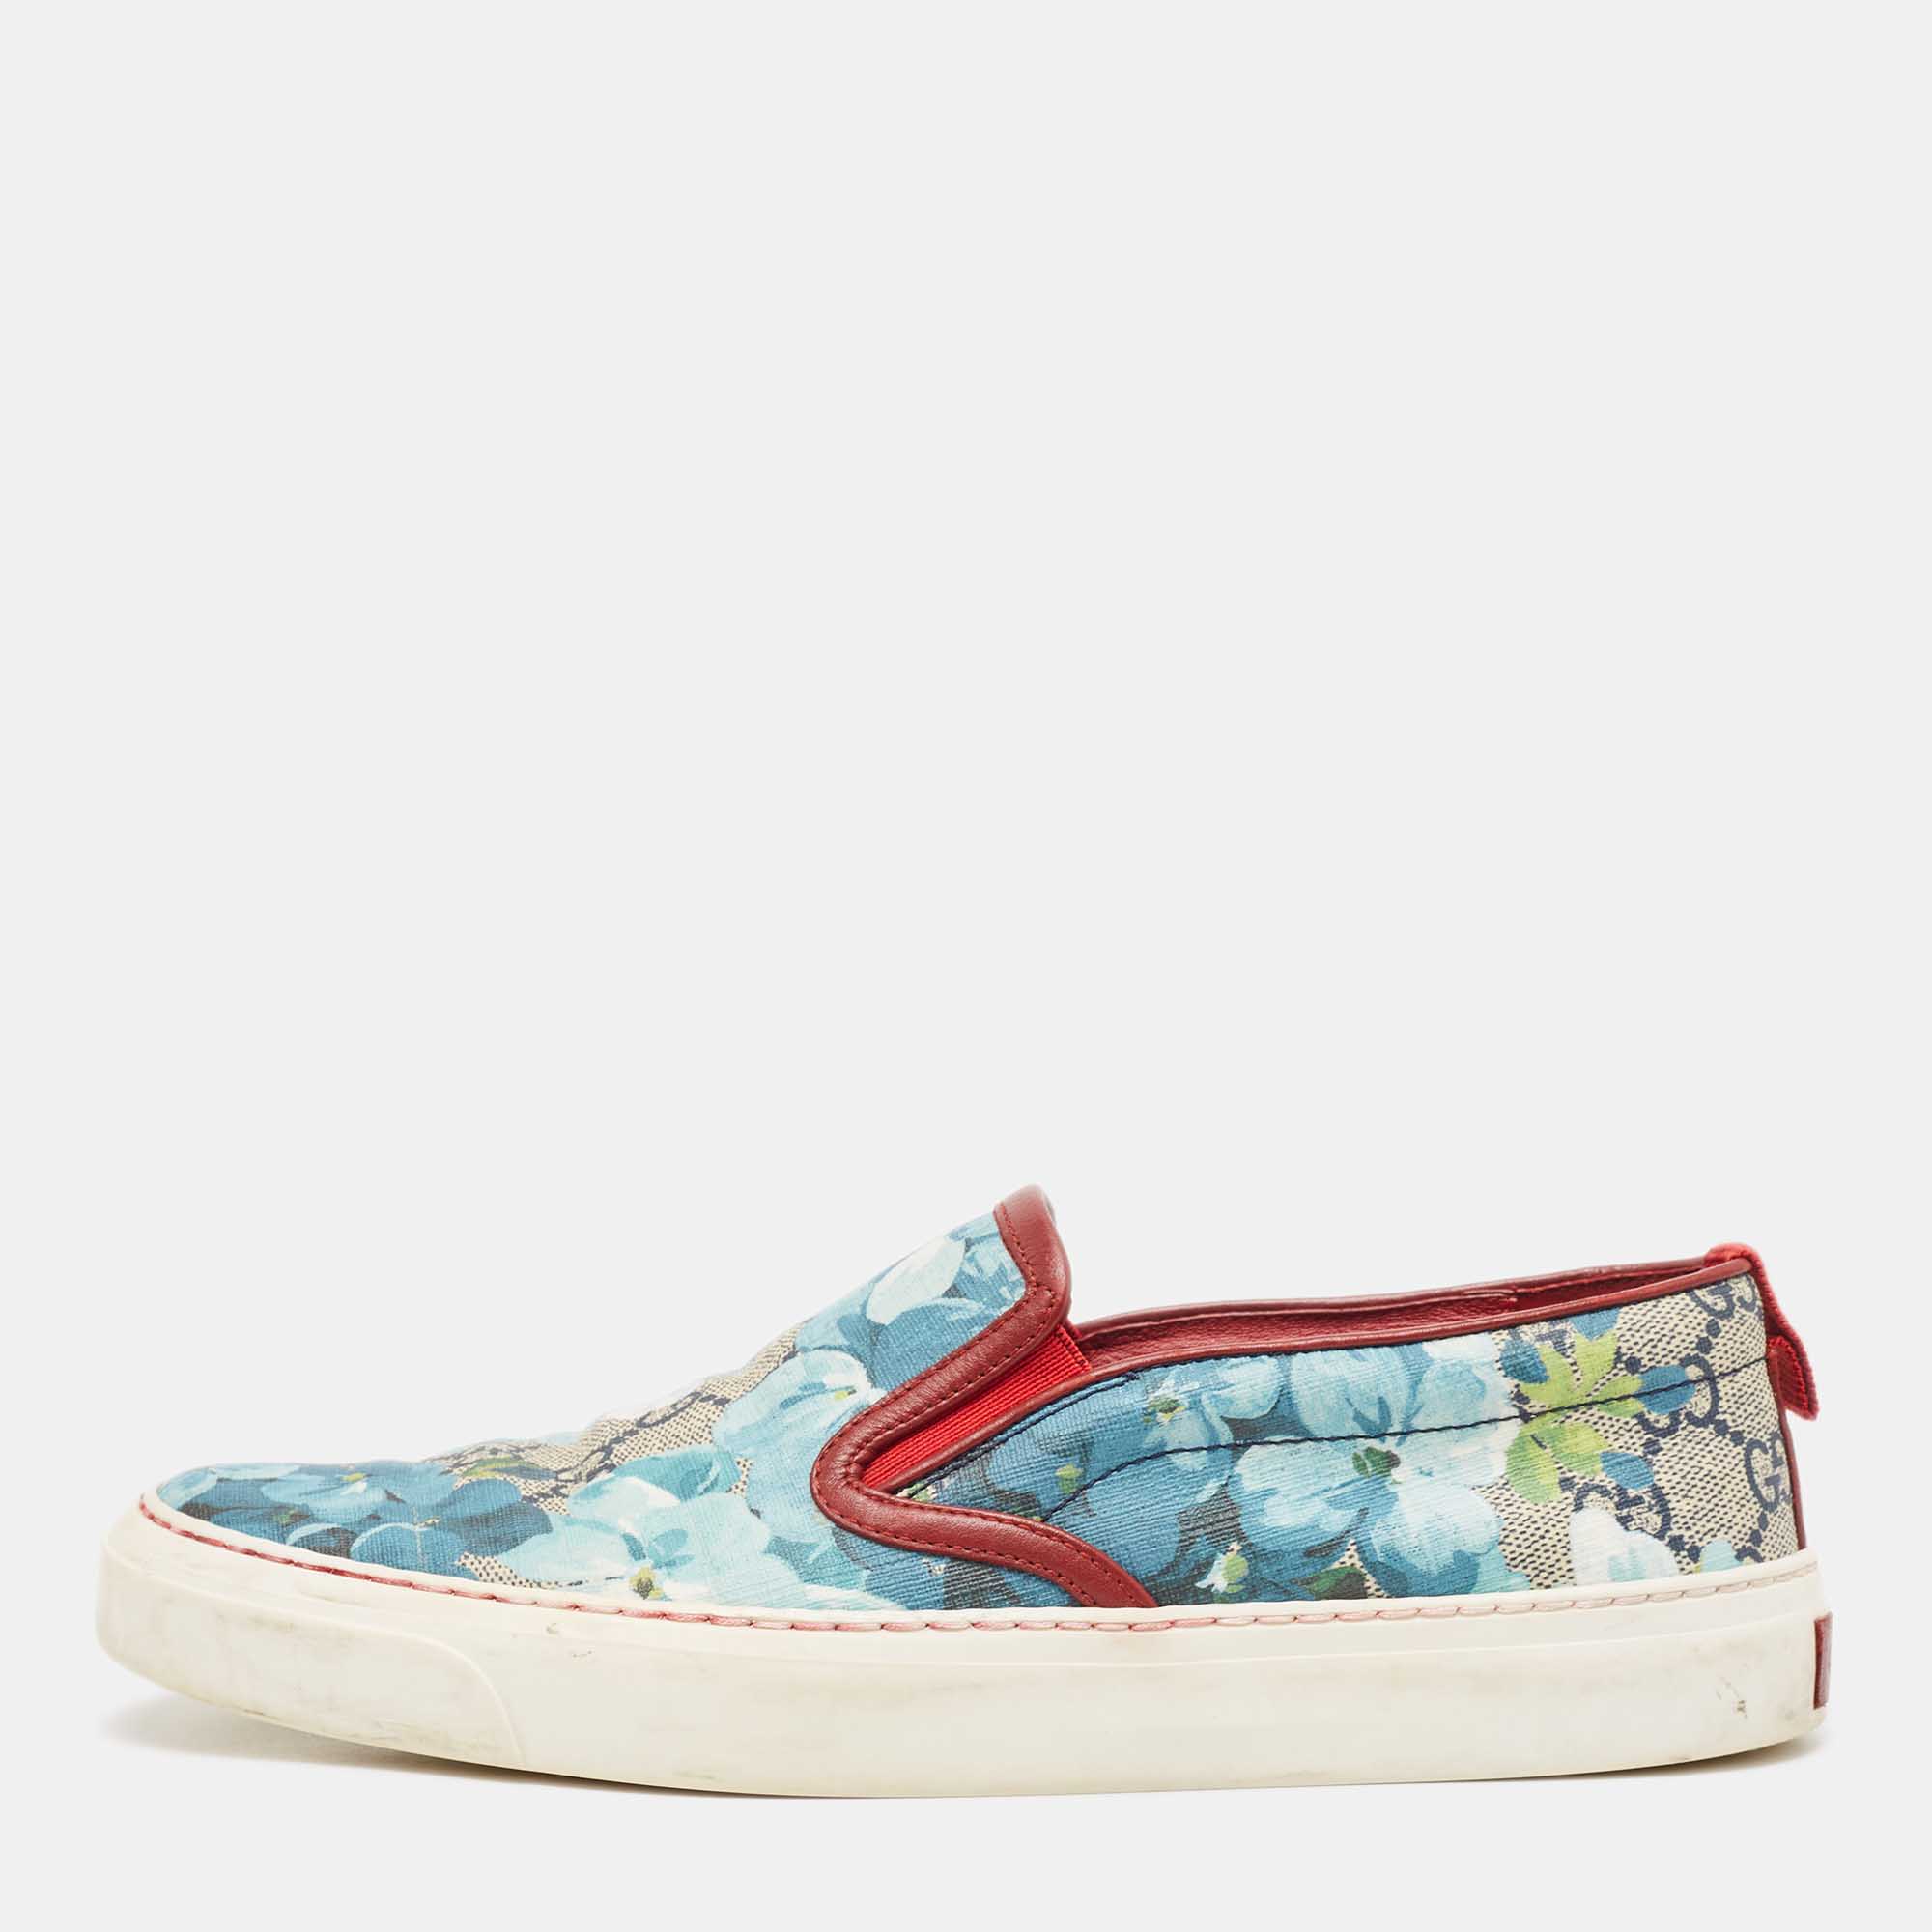 Pre-owned Gucci Multicolor Gg Supreme Blooms Printed Canvas Slip On Trainers Size 37.5